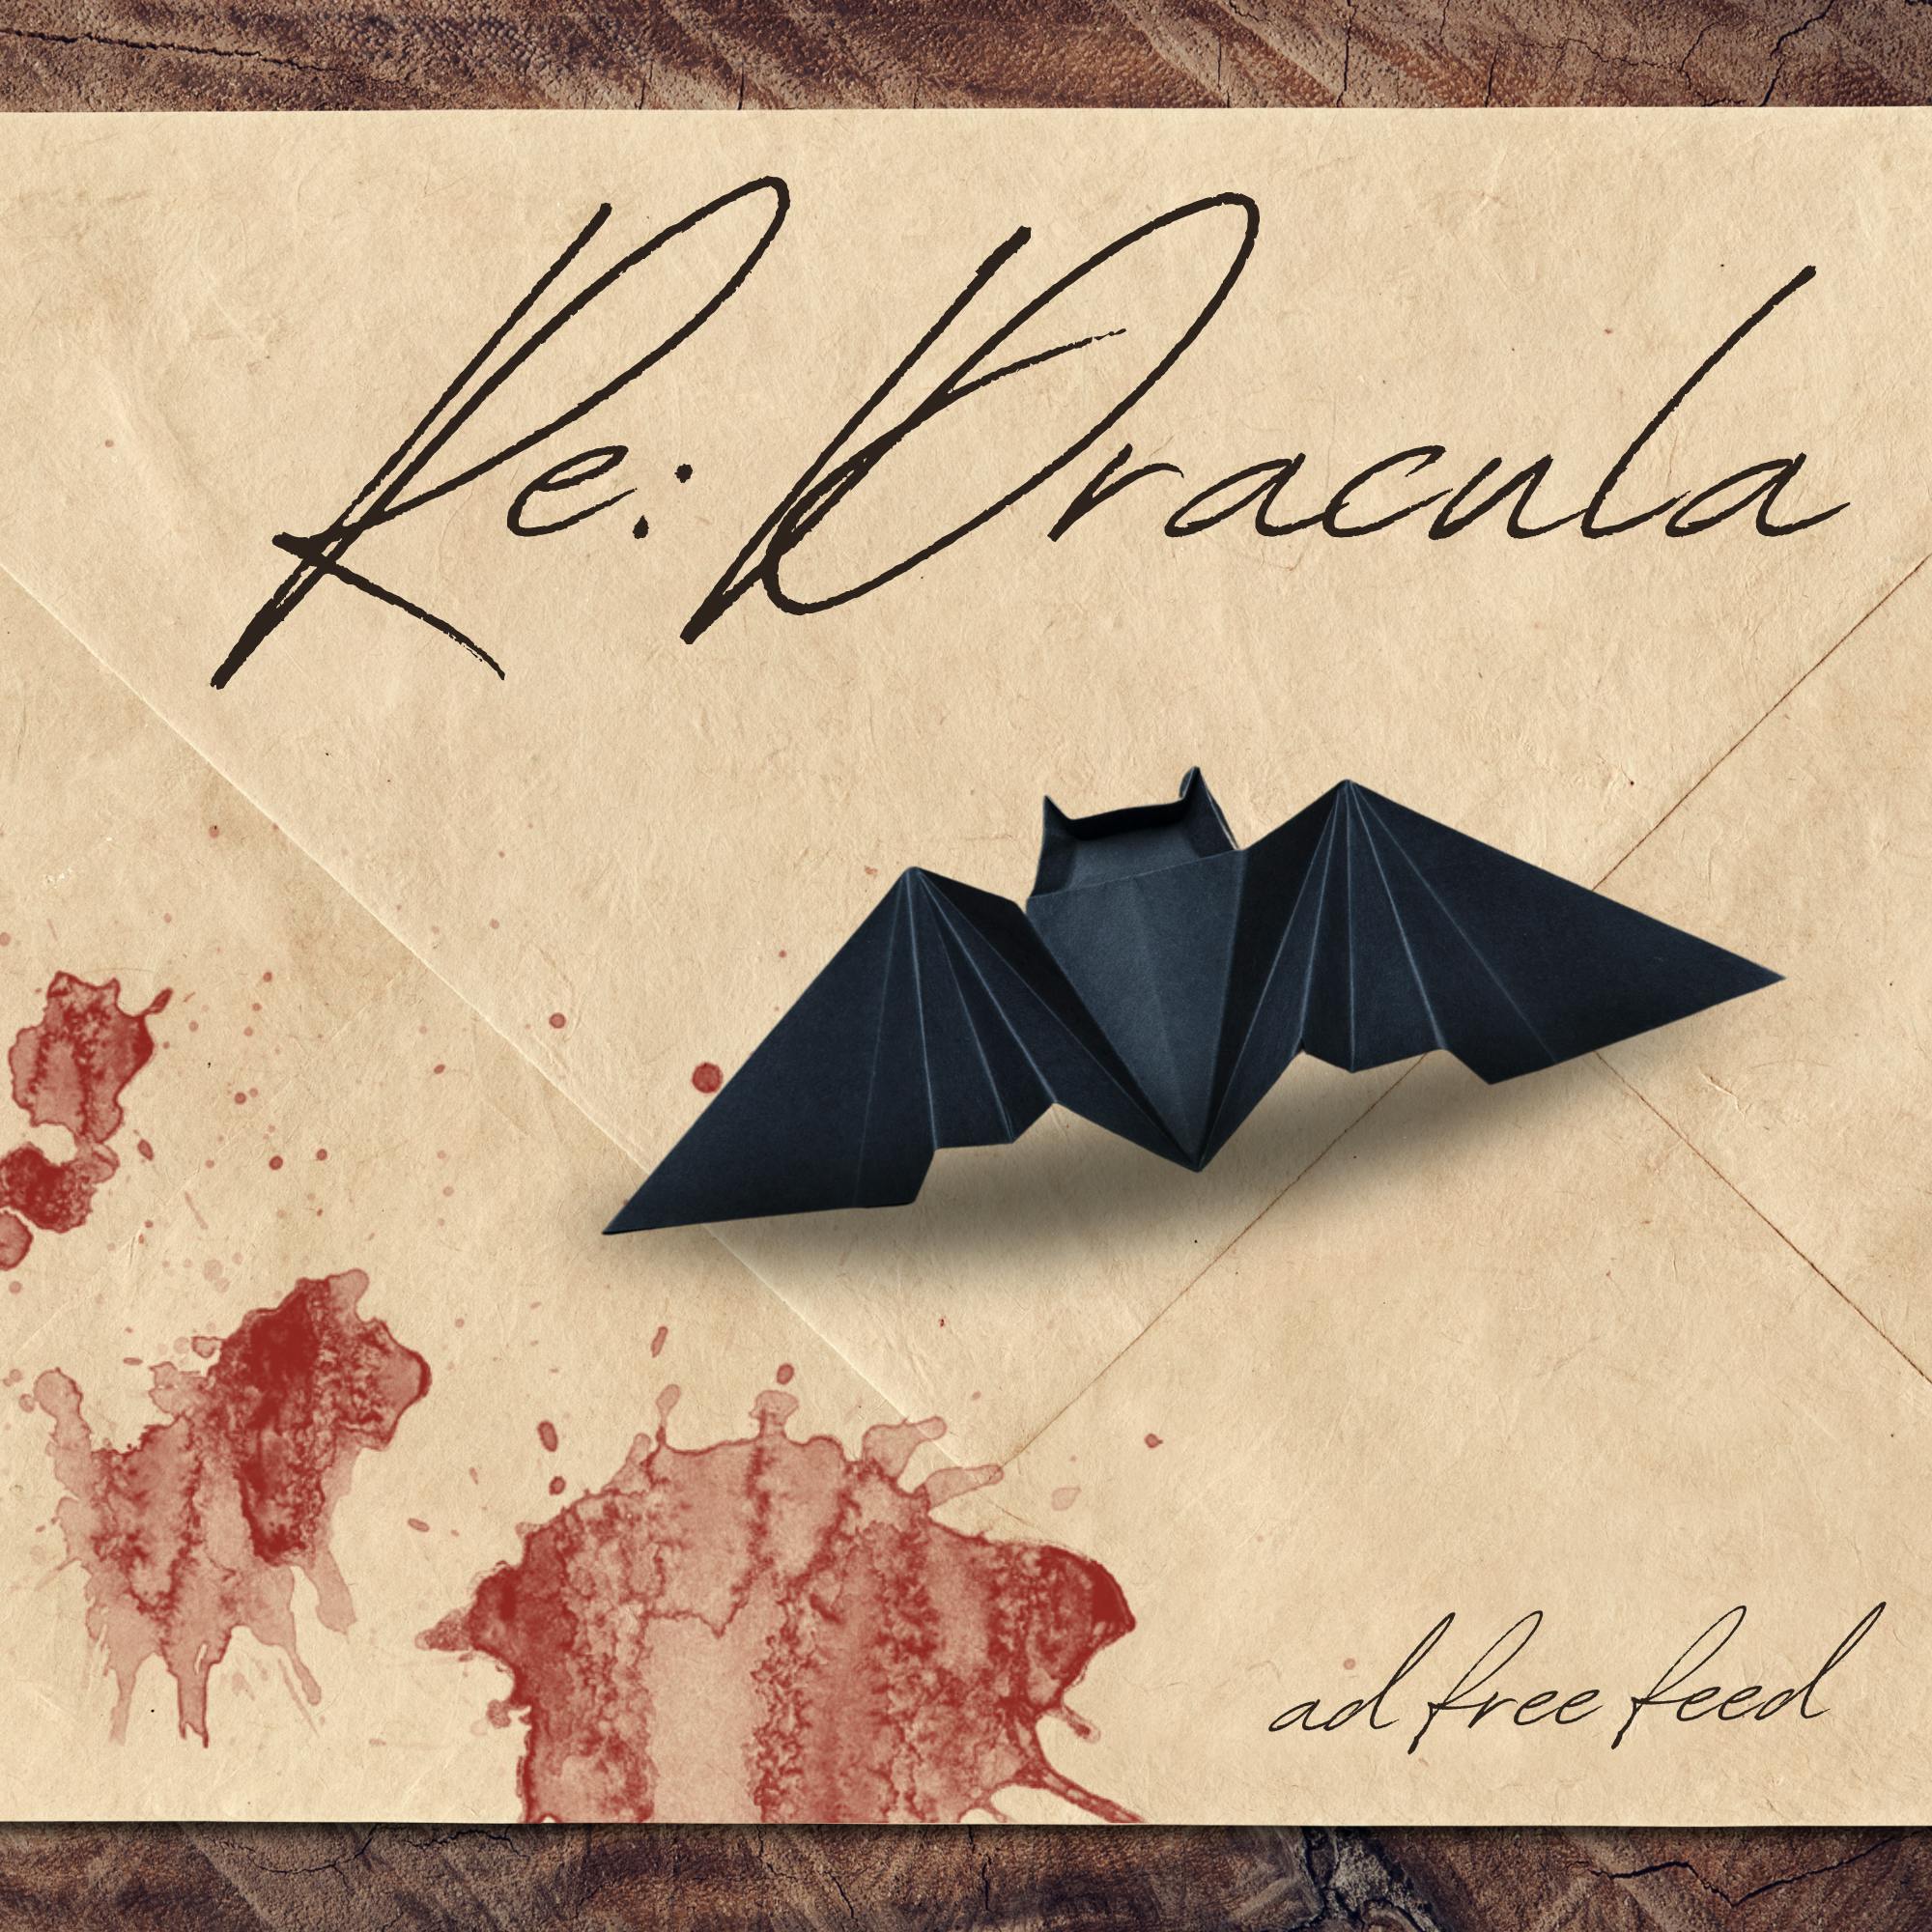 Re: Dracula podcast tile